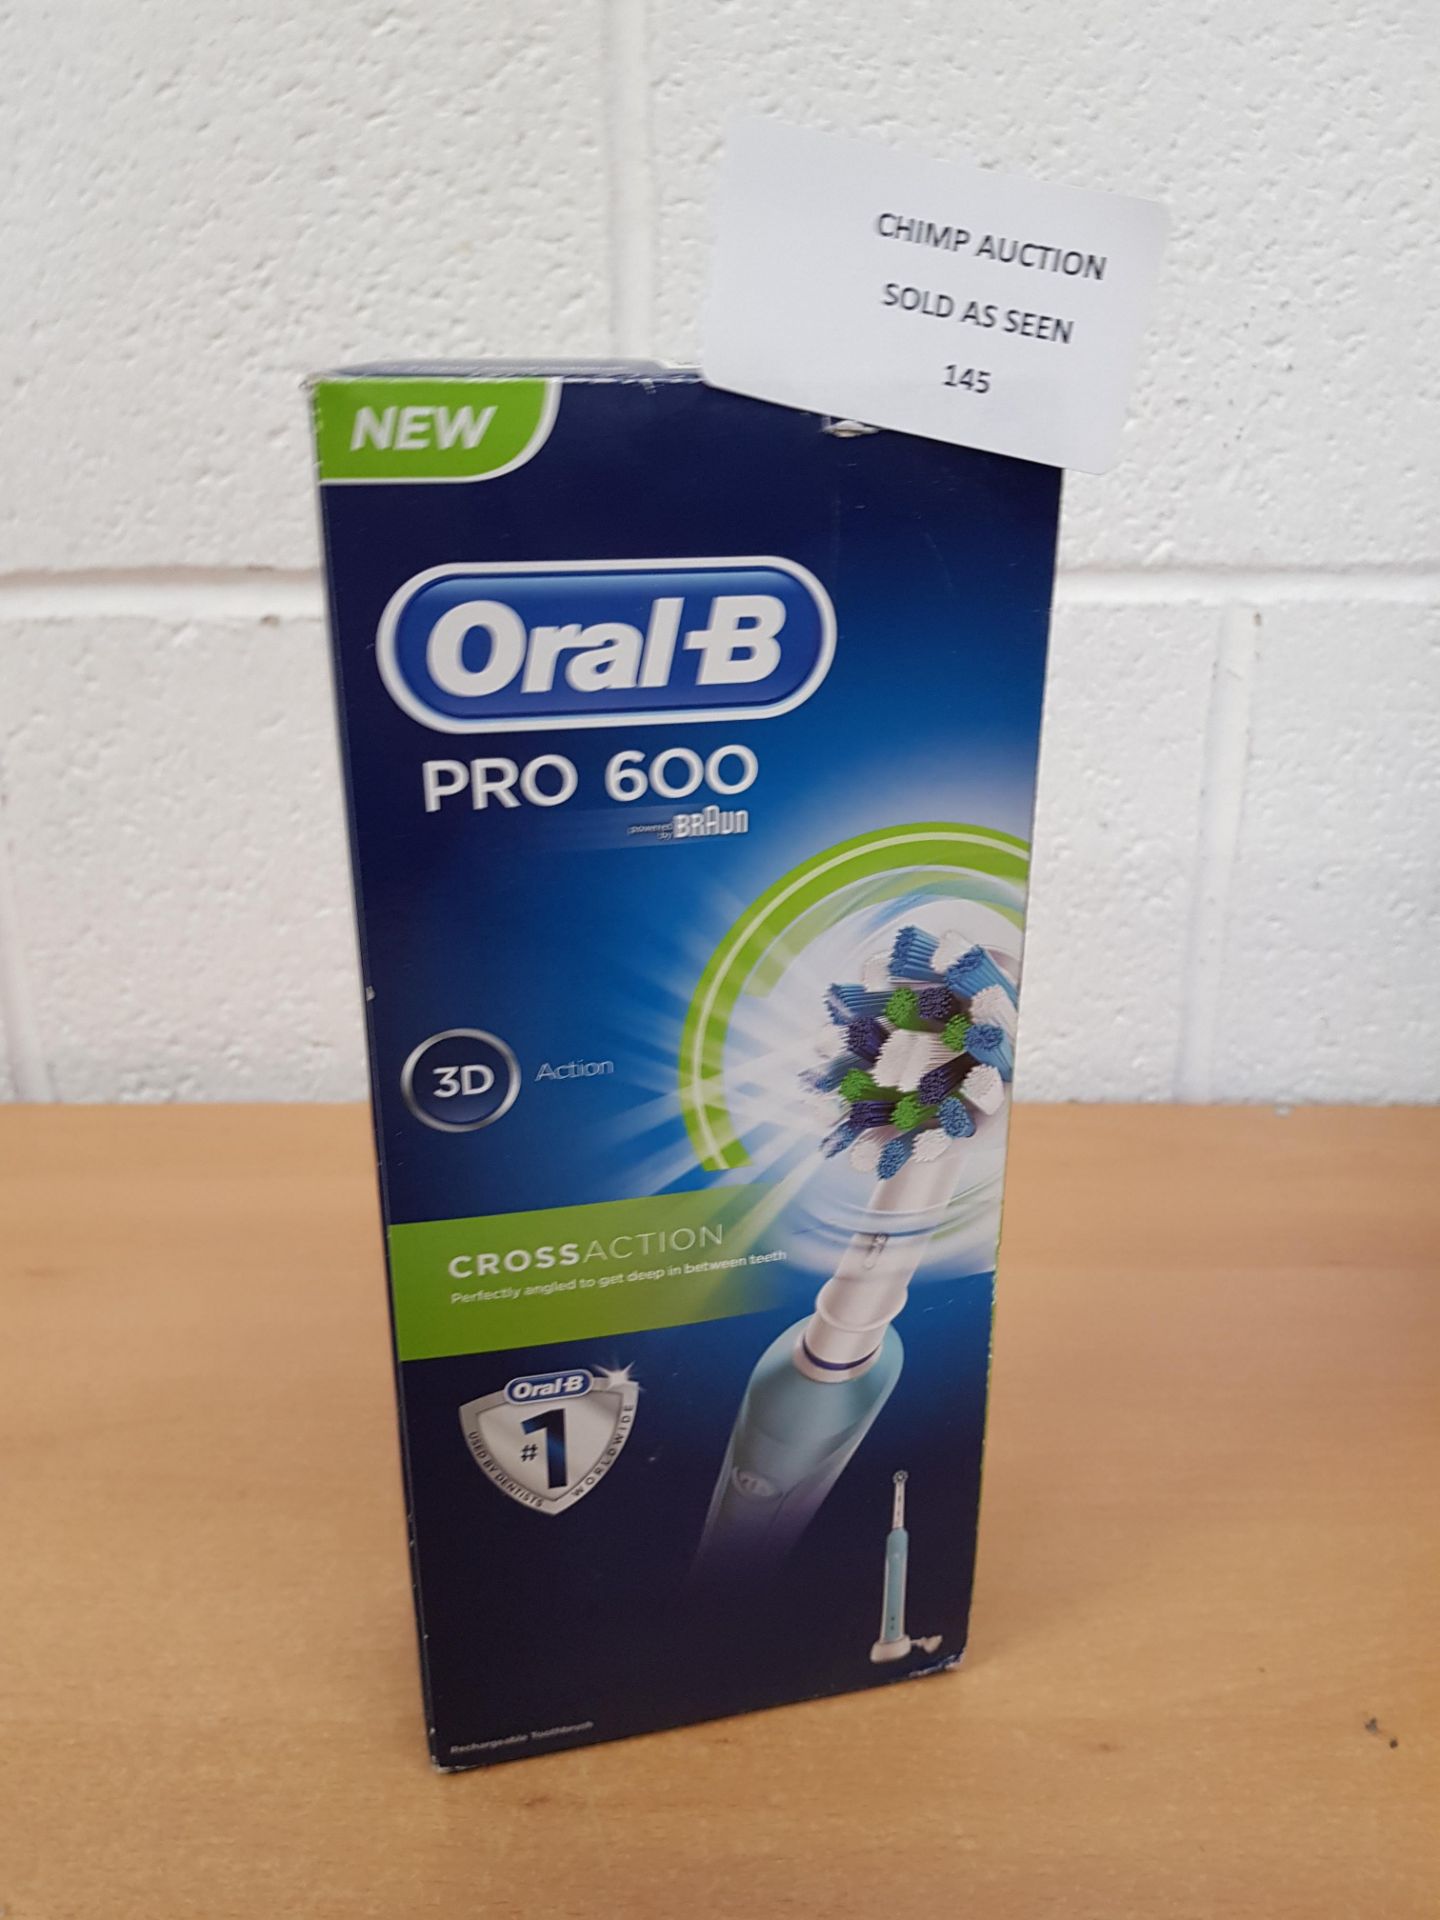 Oral-B Pro 600 electric 3D Action toothbrush